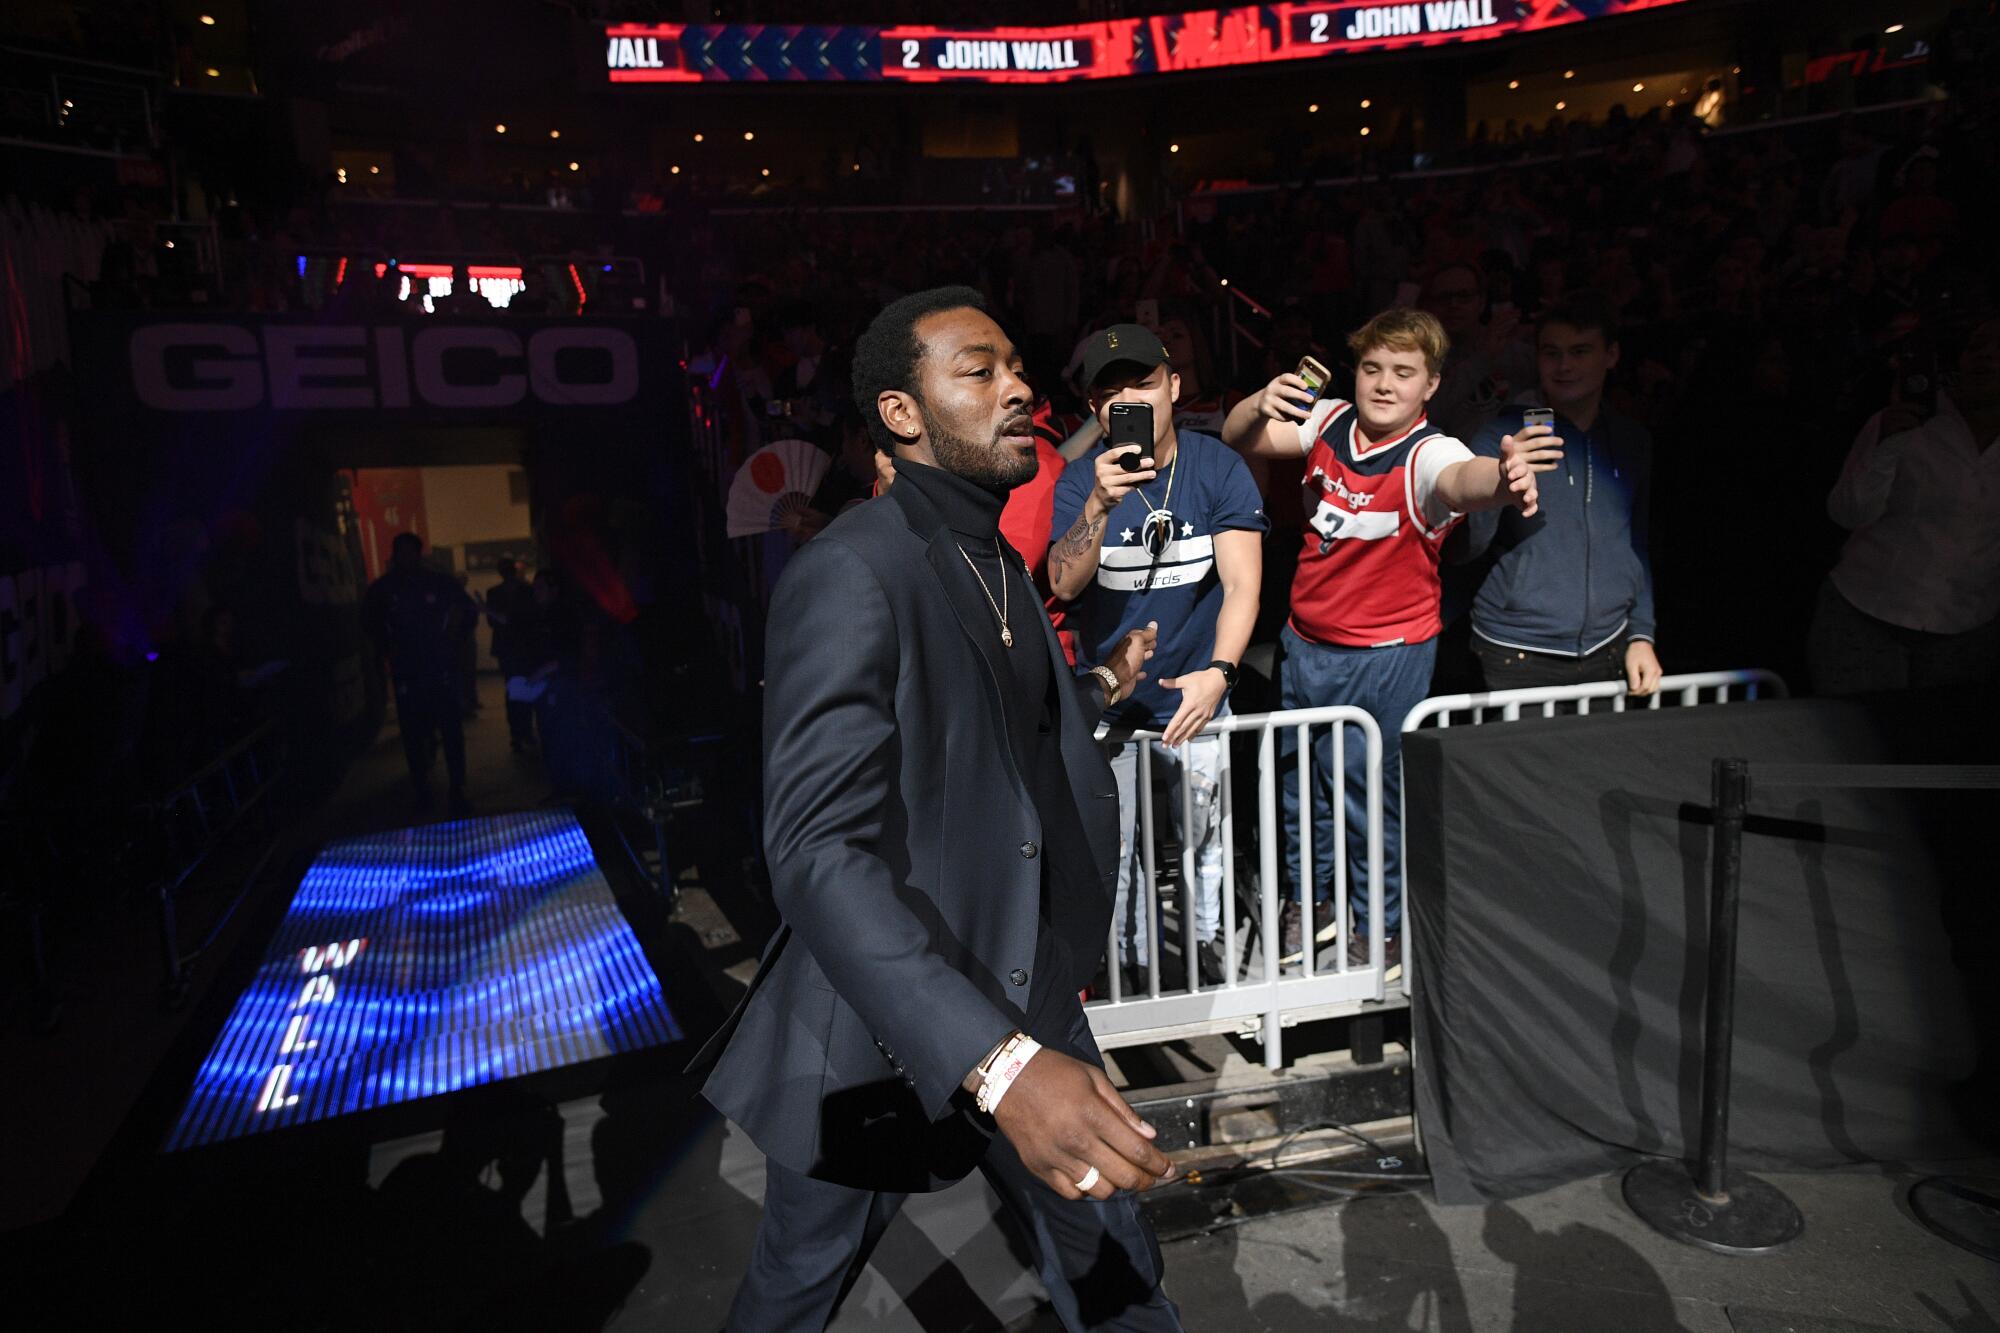 Wizards guard John Wall enters the court during player introductions in 2019.